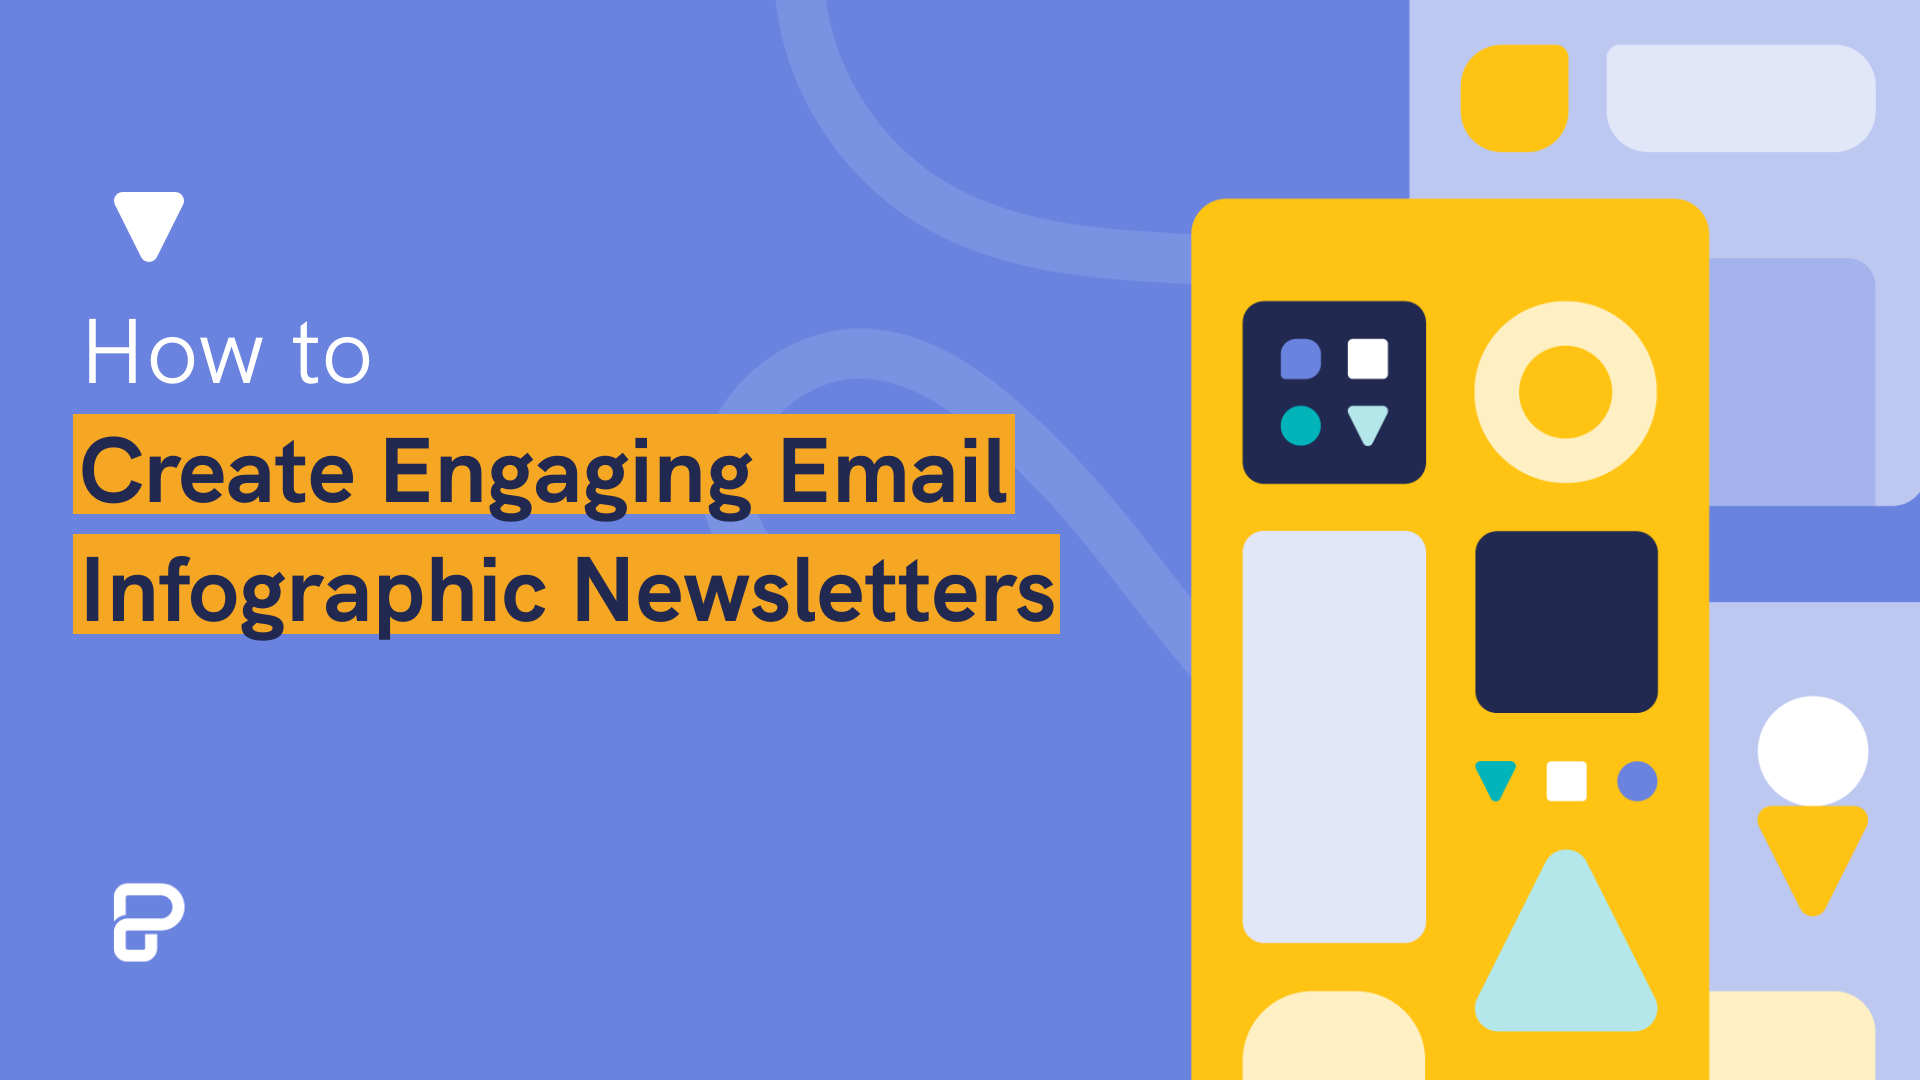 infographic, infographic newsletter, how to create engaging email,